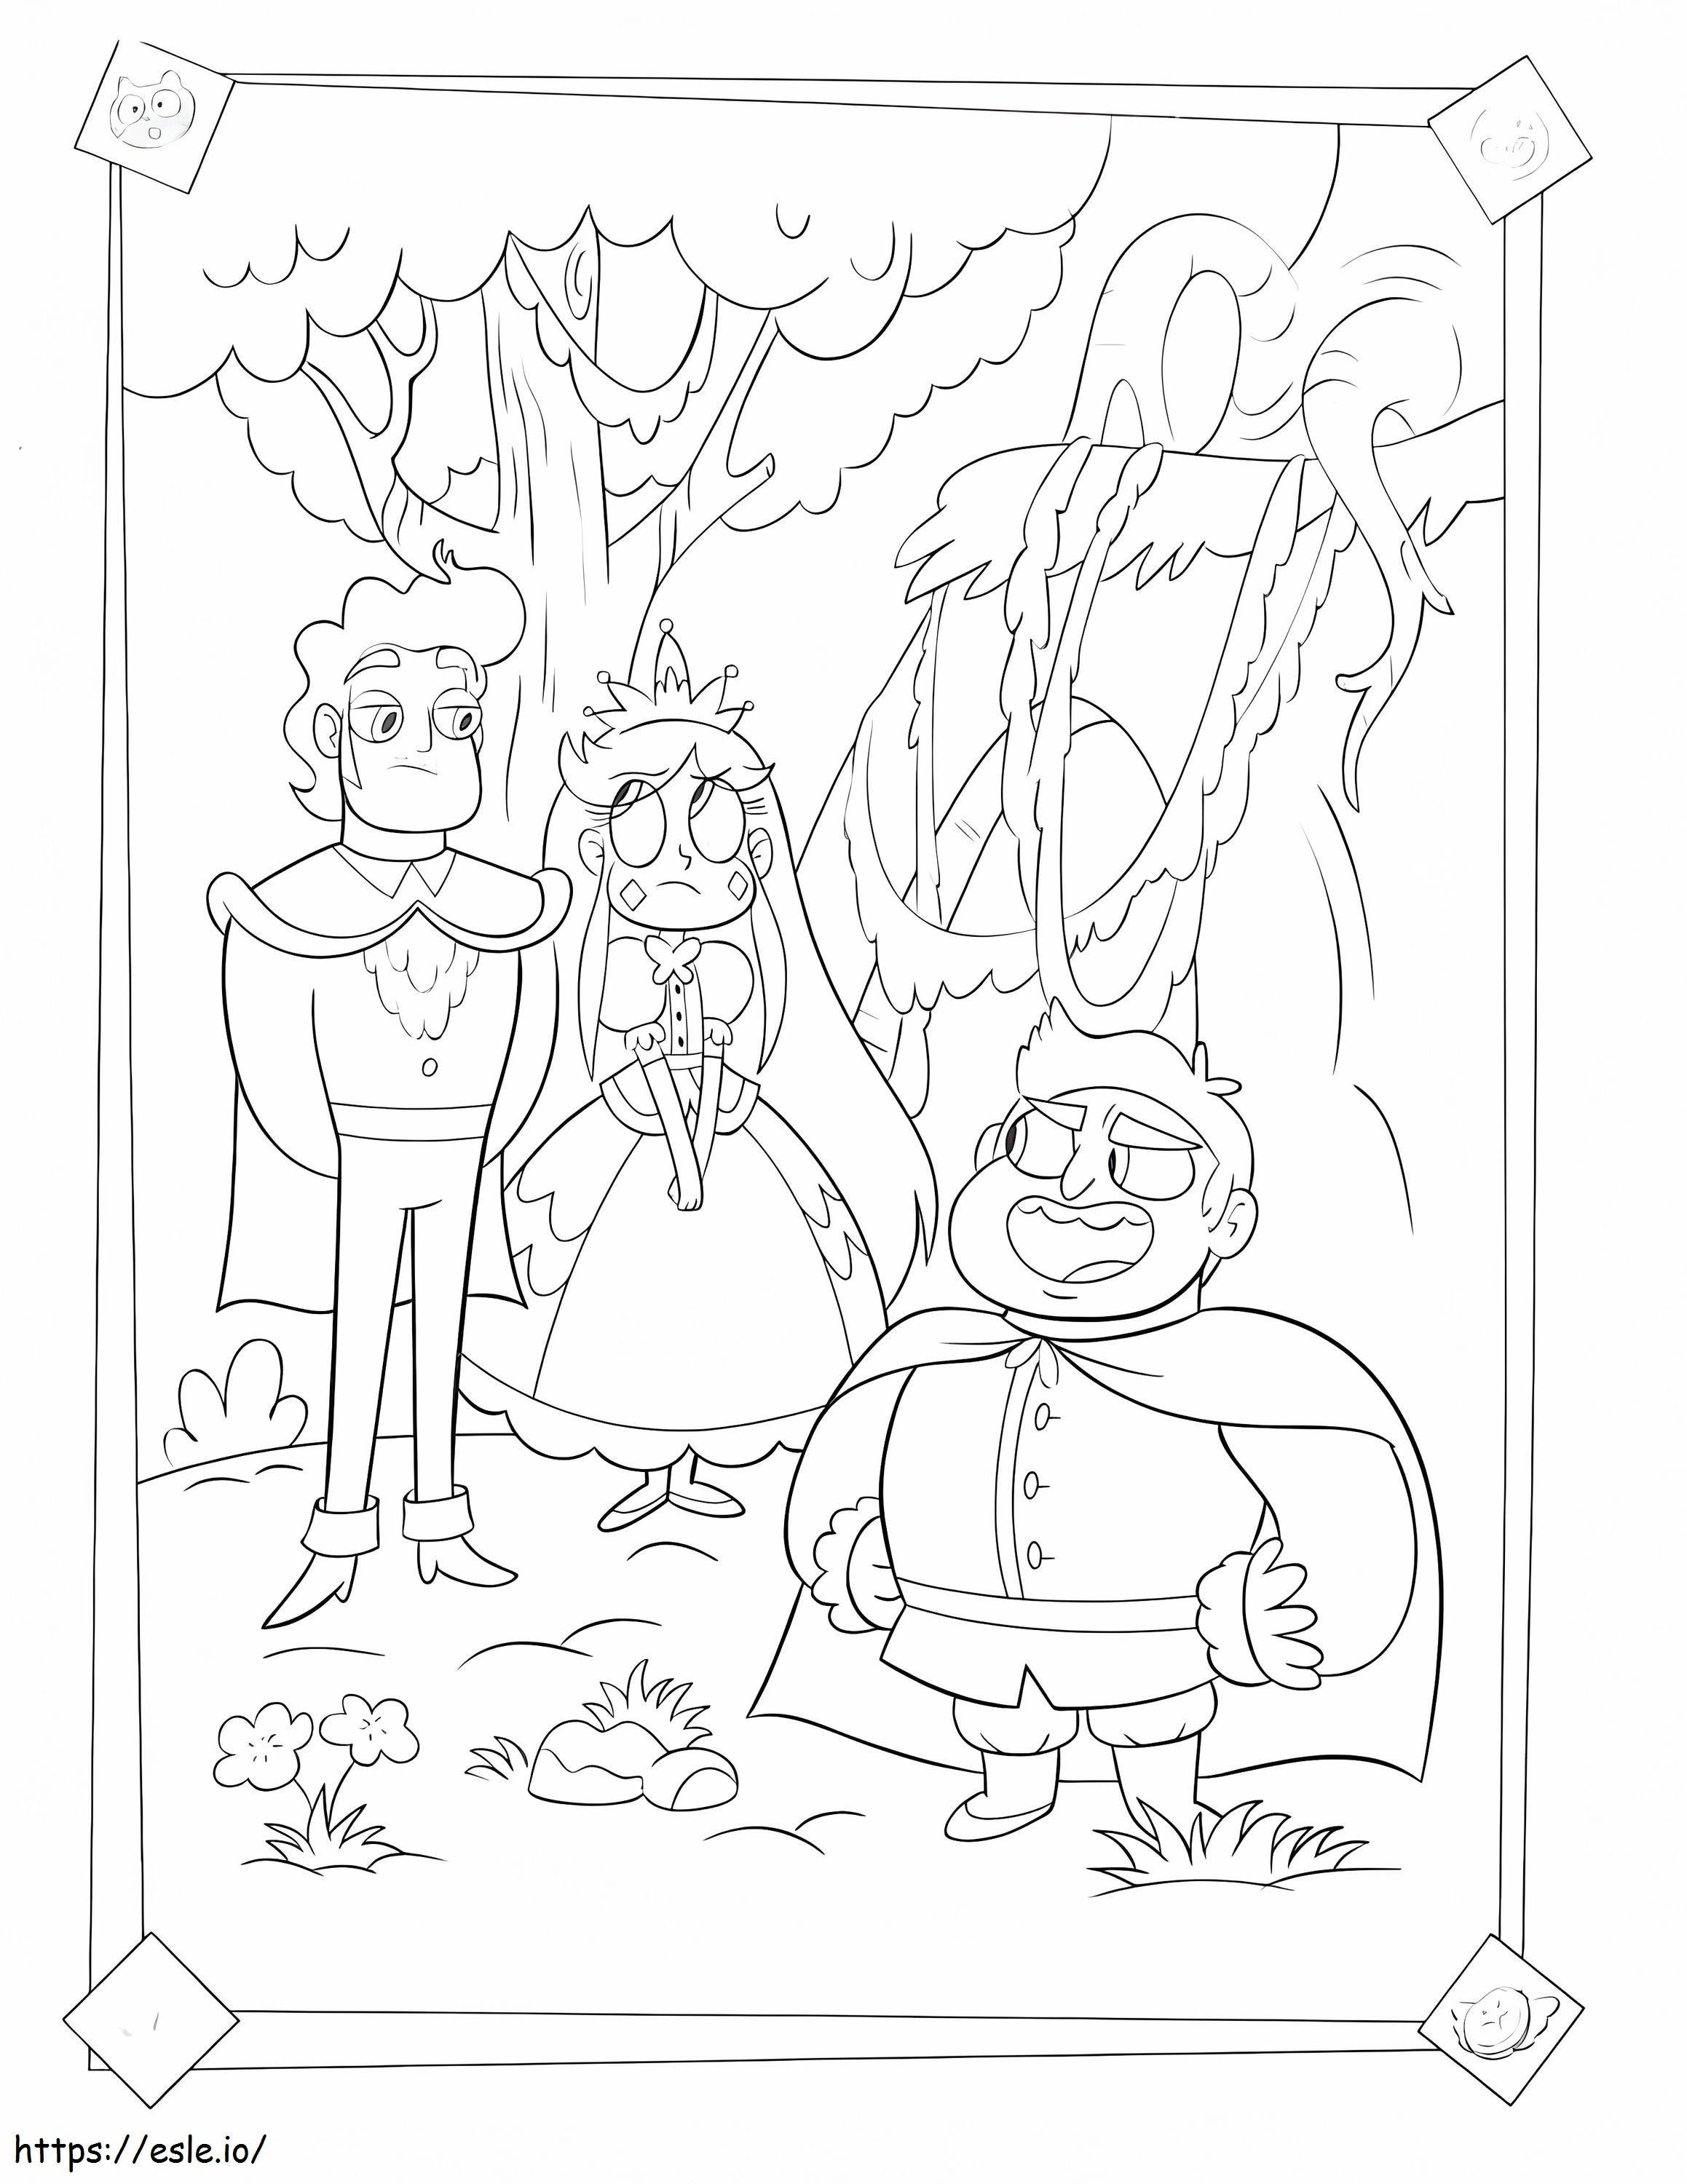 Star Vs. The Forces Of Evil 2 coloring page